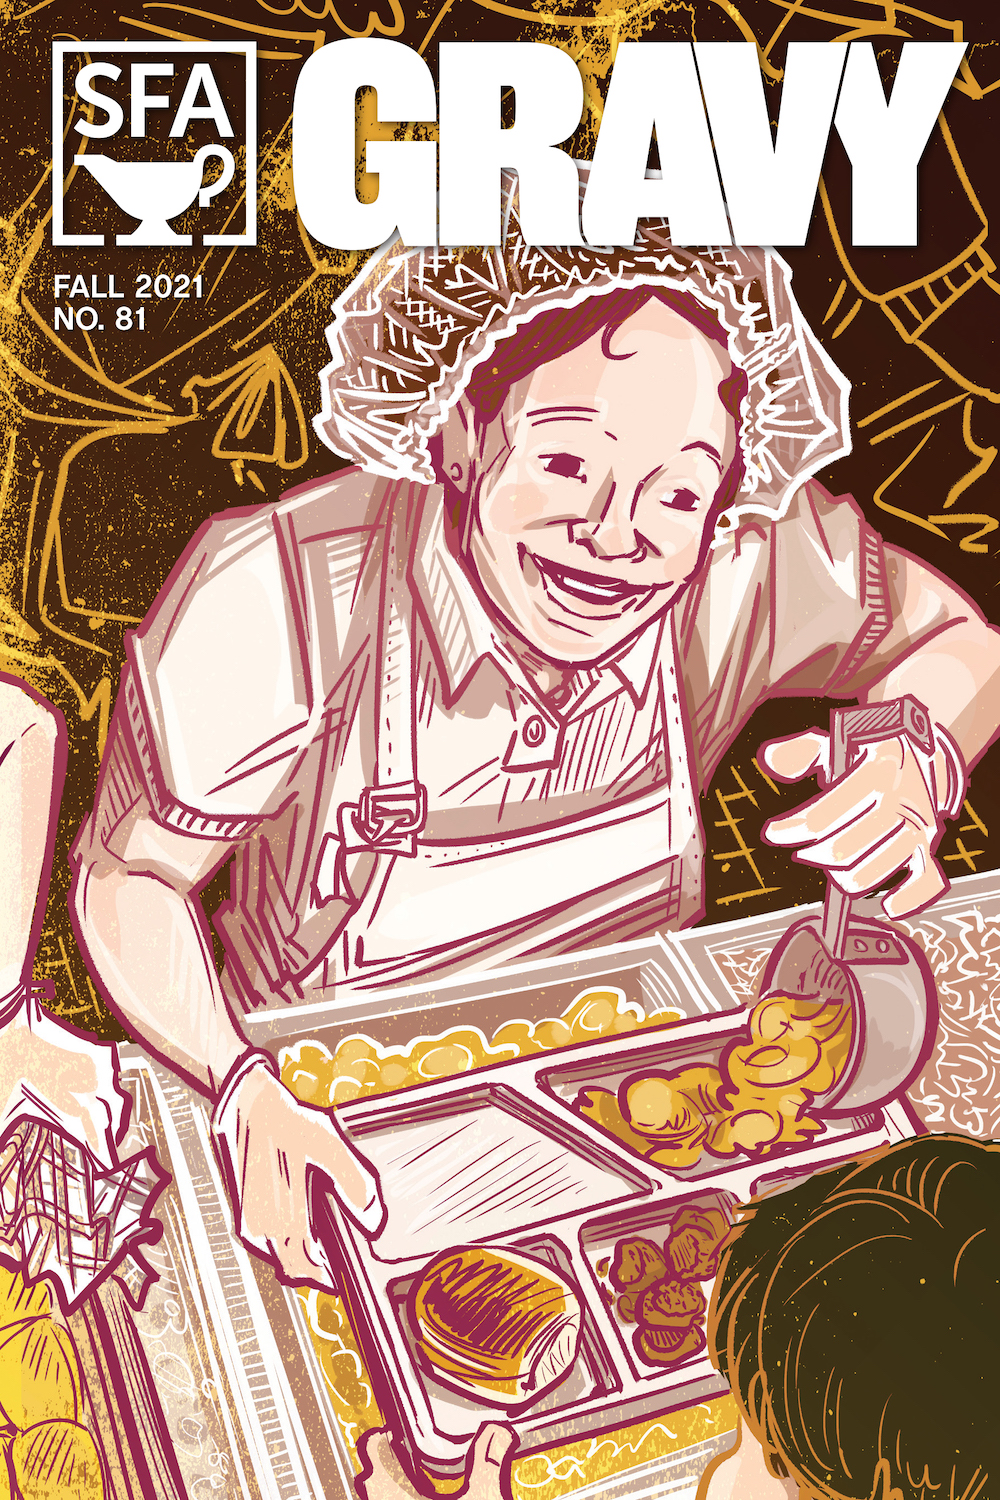 Gravy Issue 81, Fall 2021 cover image